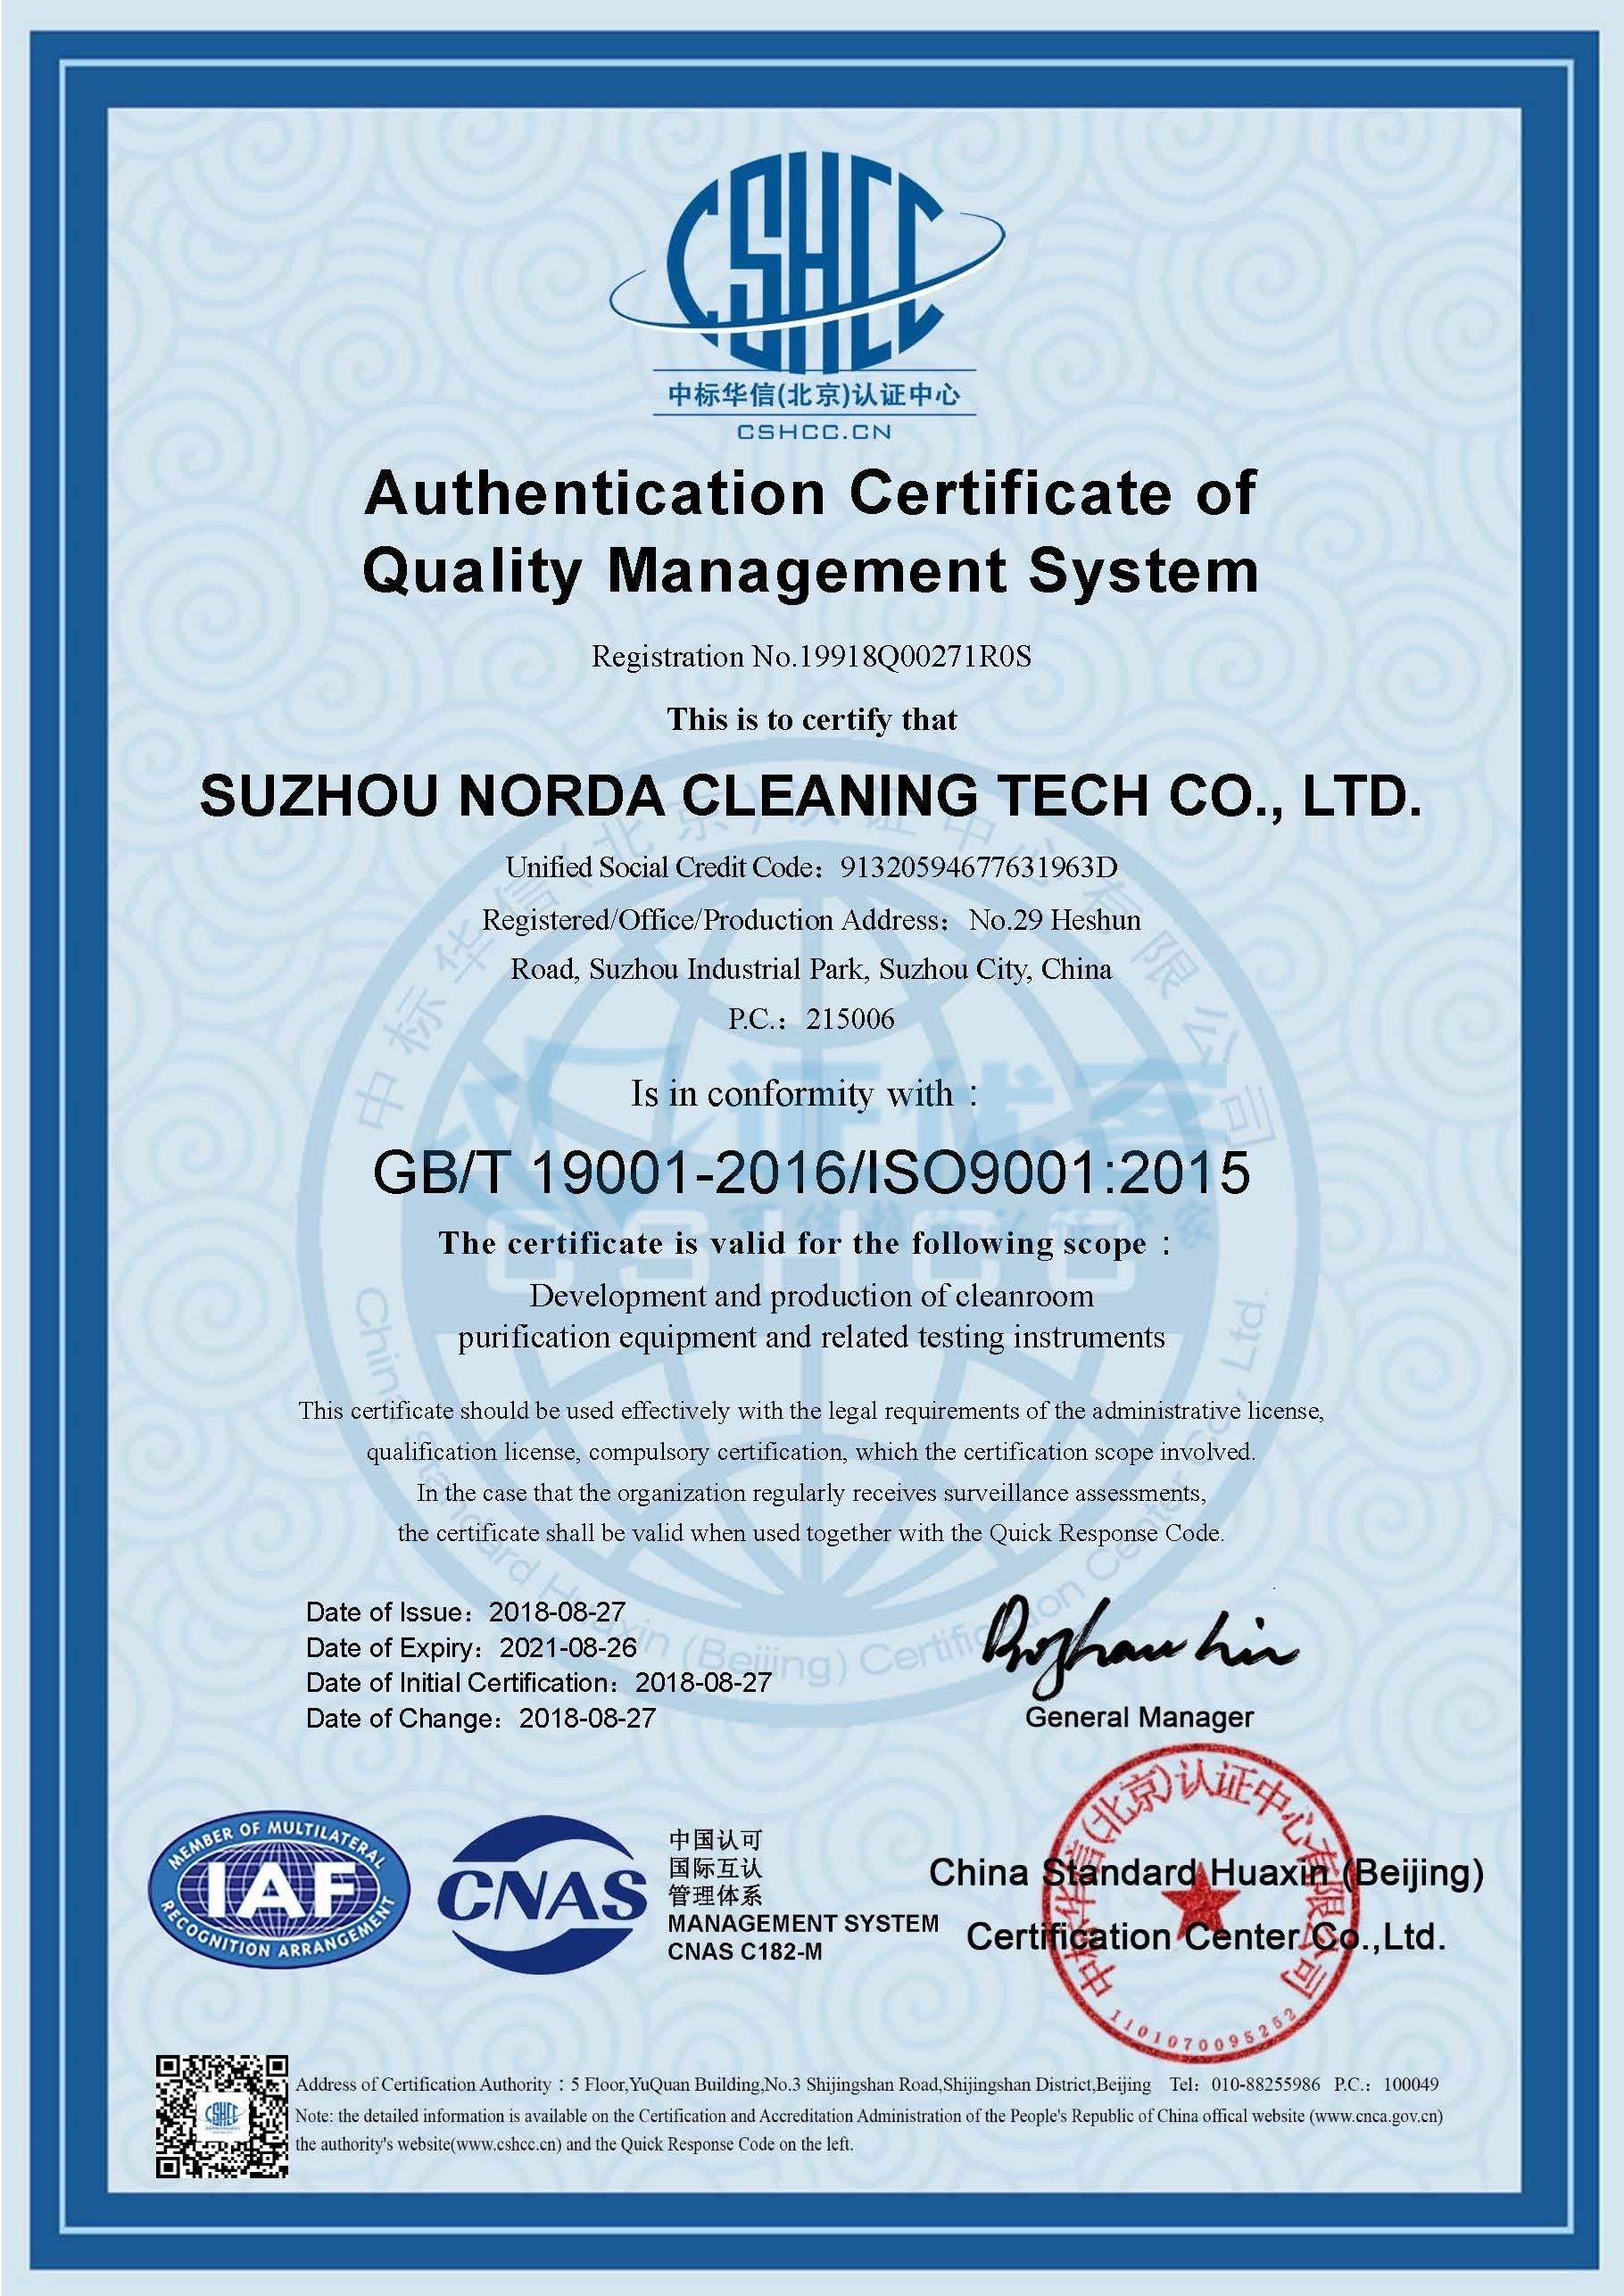 The ISO9001:2015 Certificate